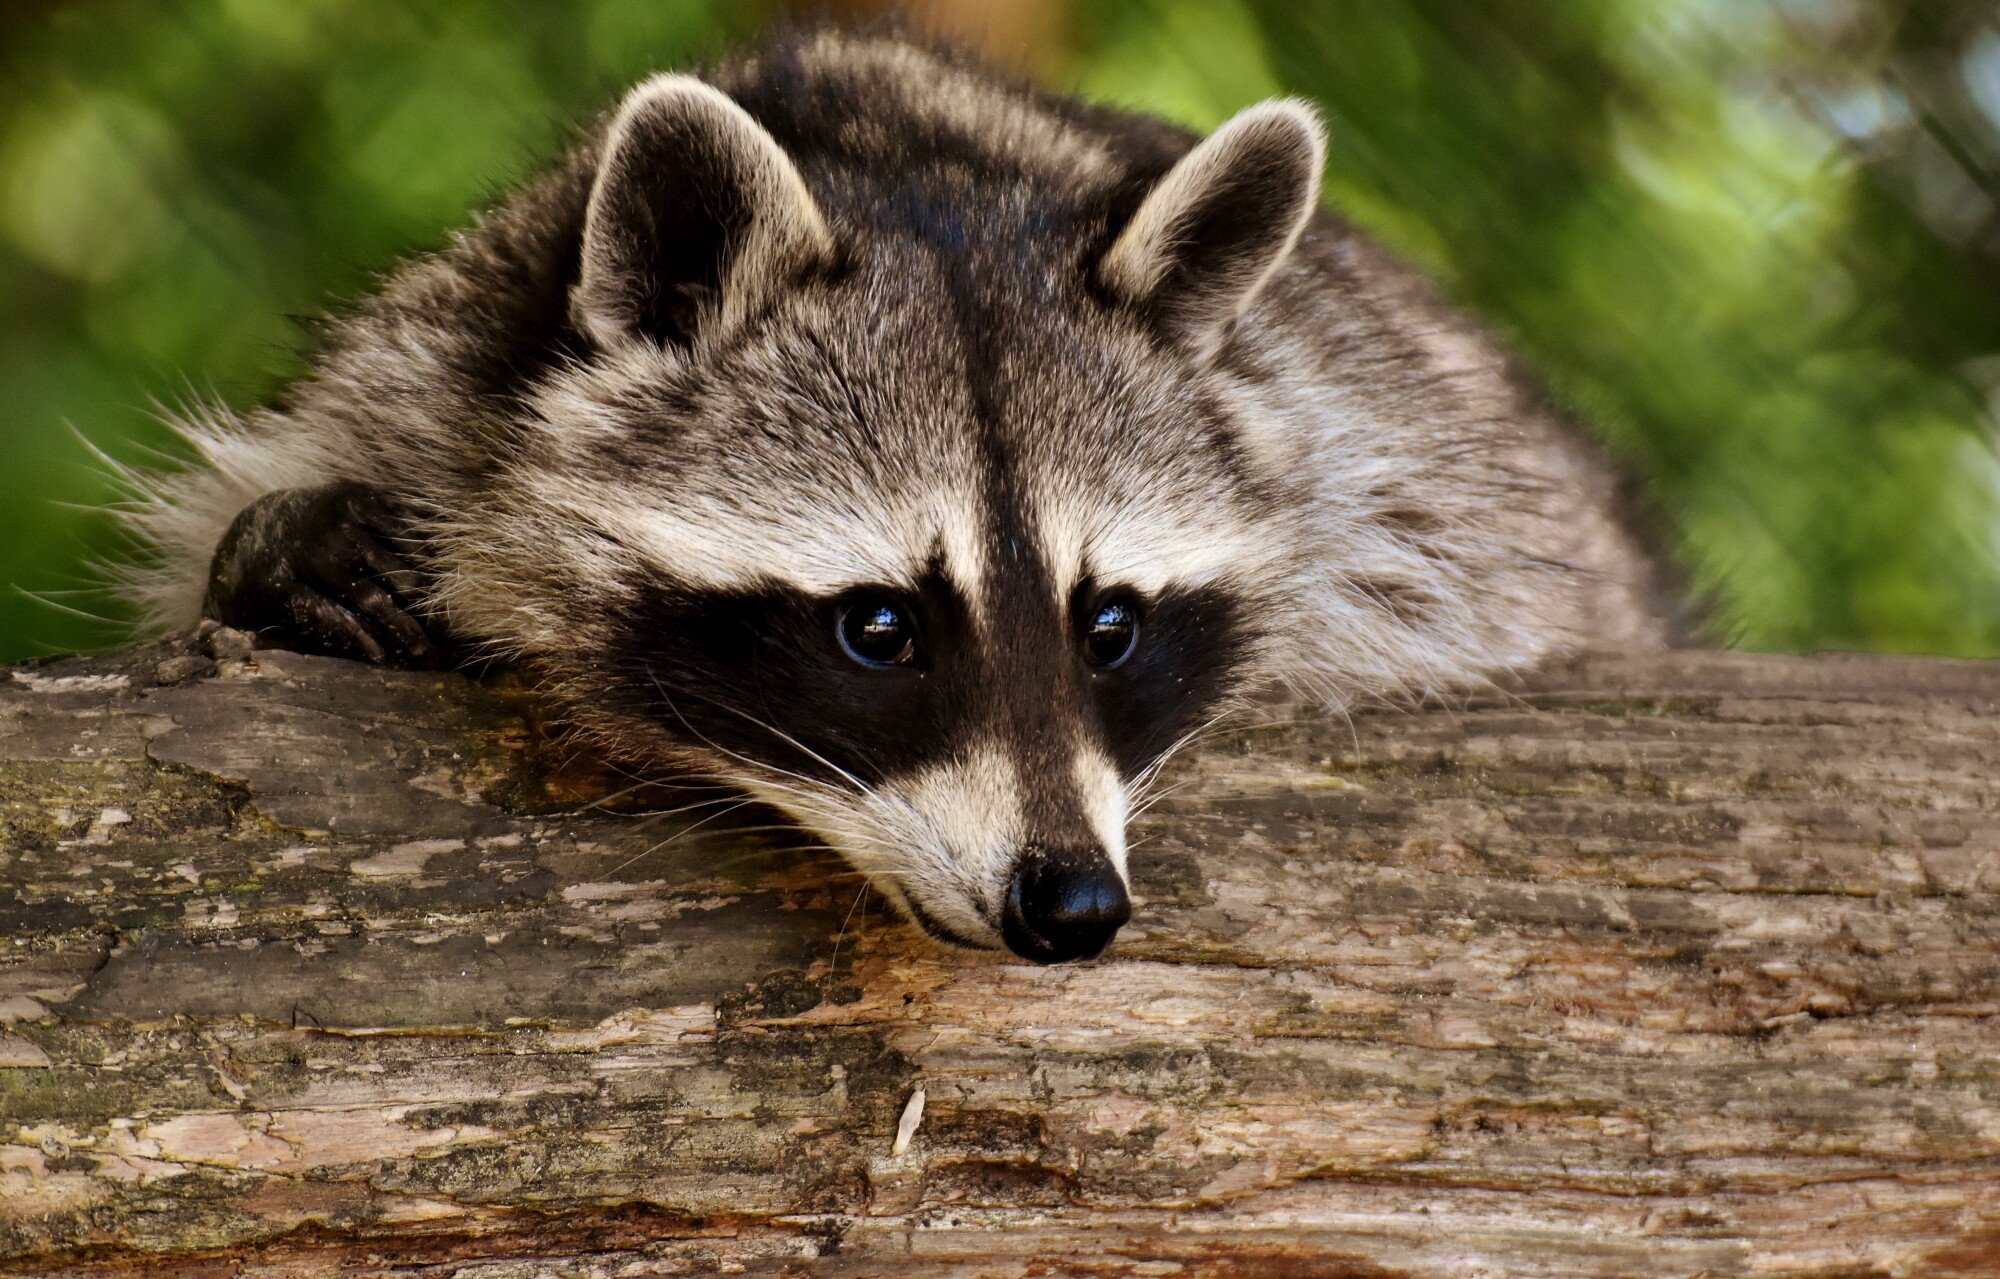 Raccoon Removal Services: Why Should You Hire a Professional?